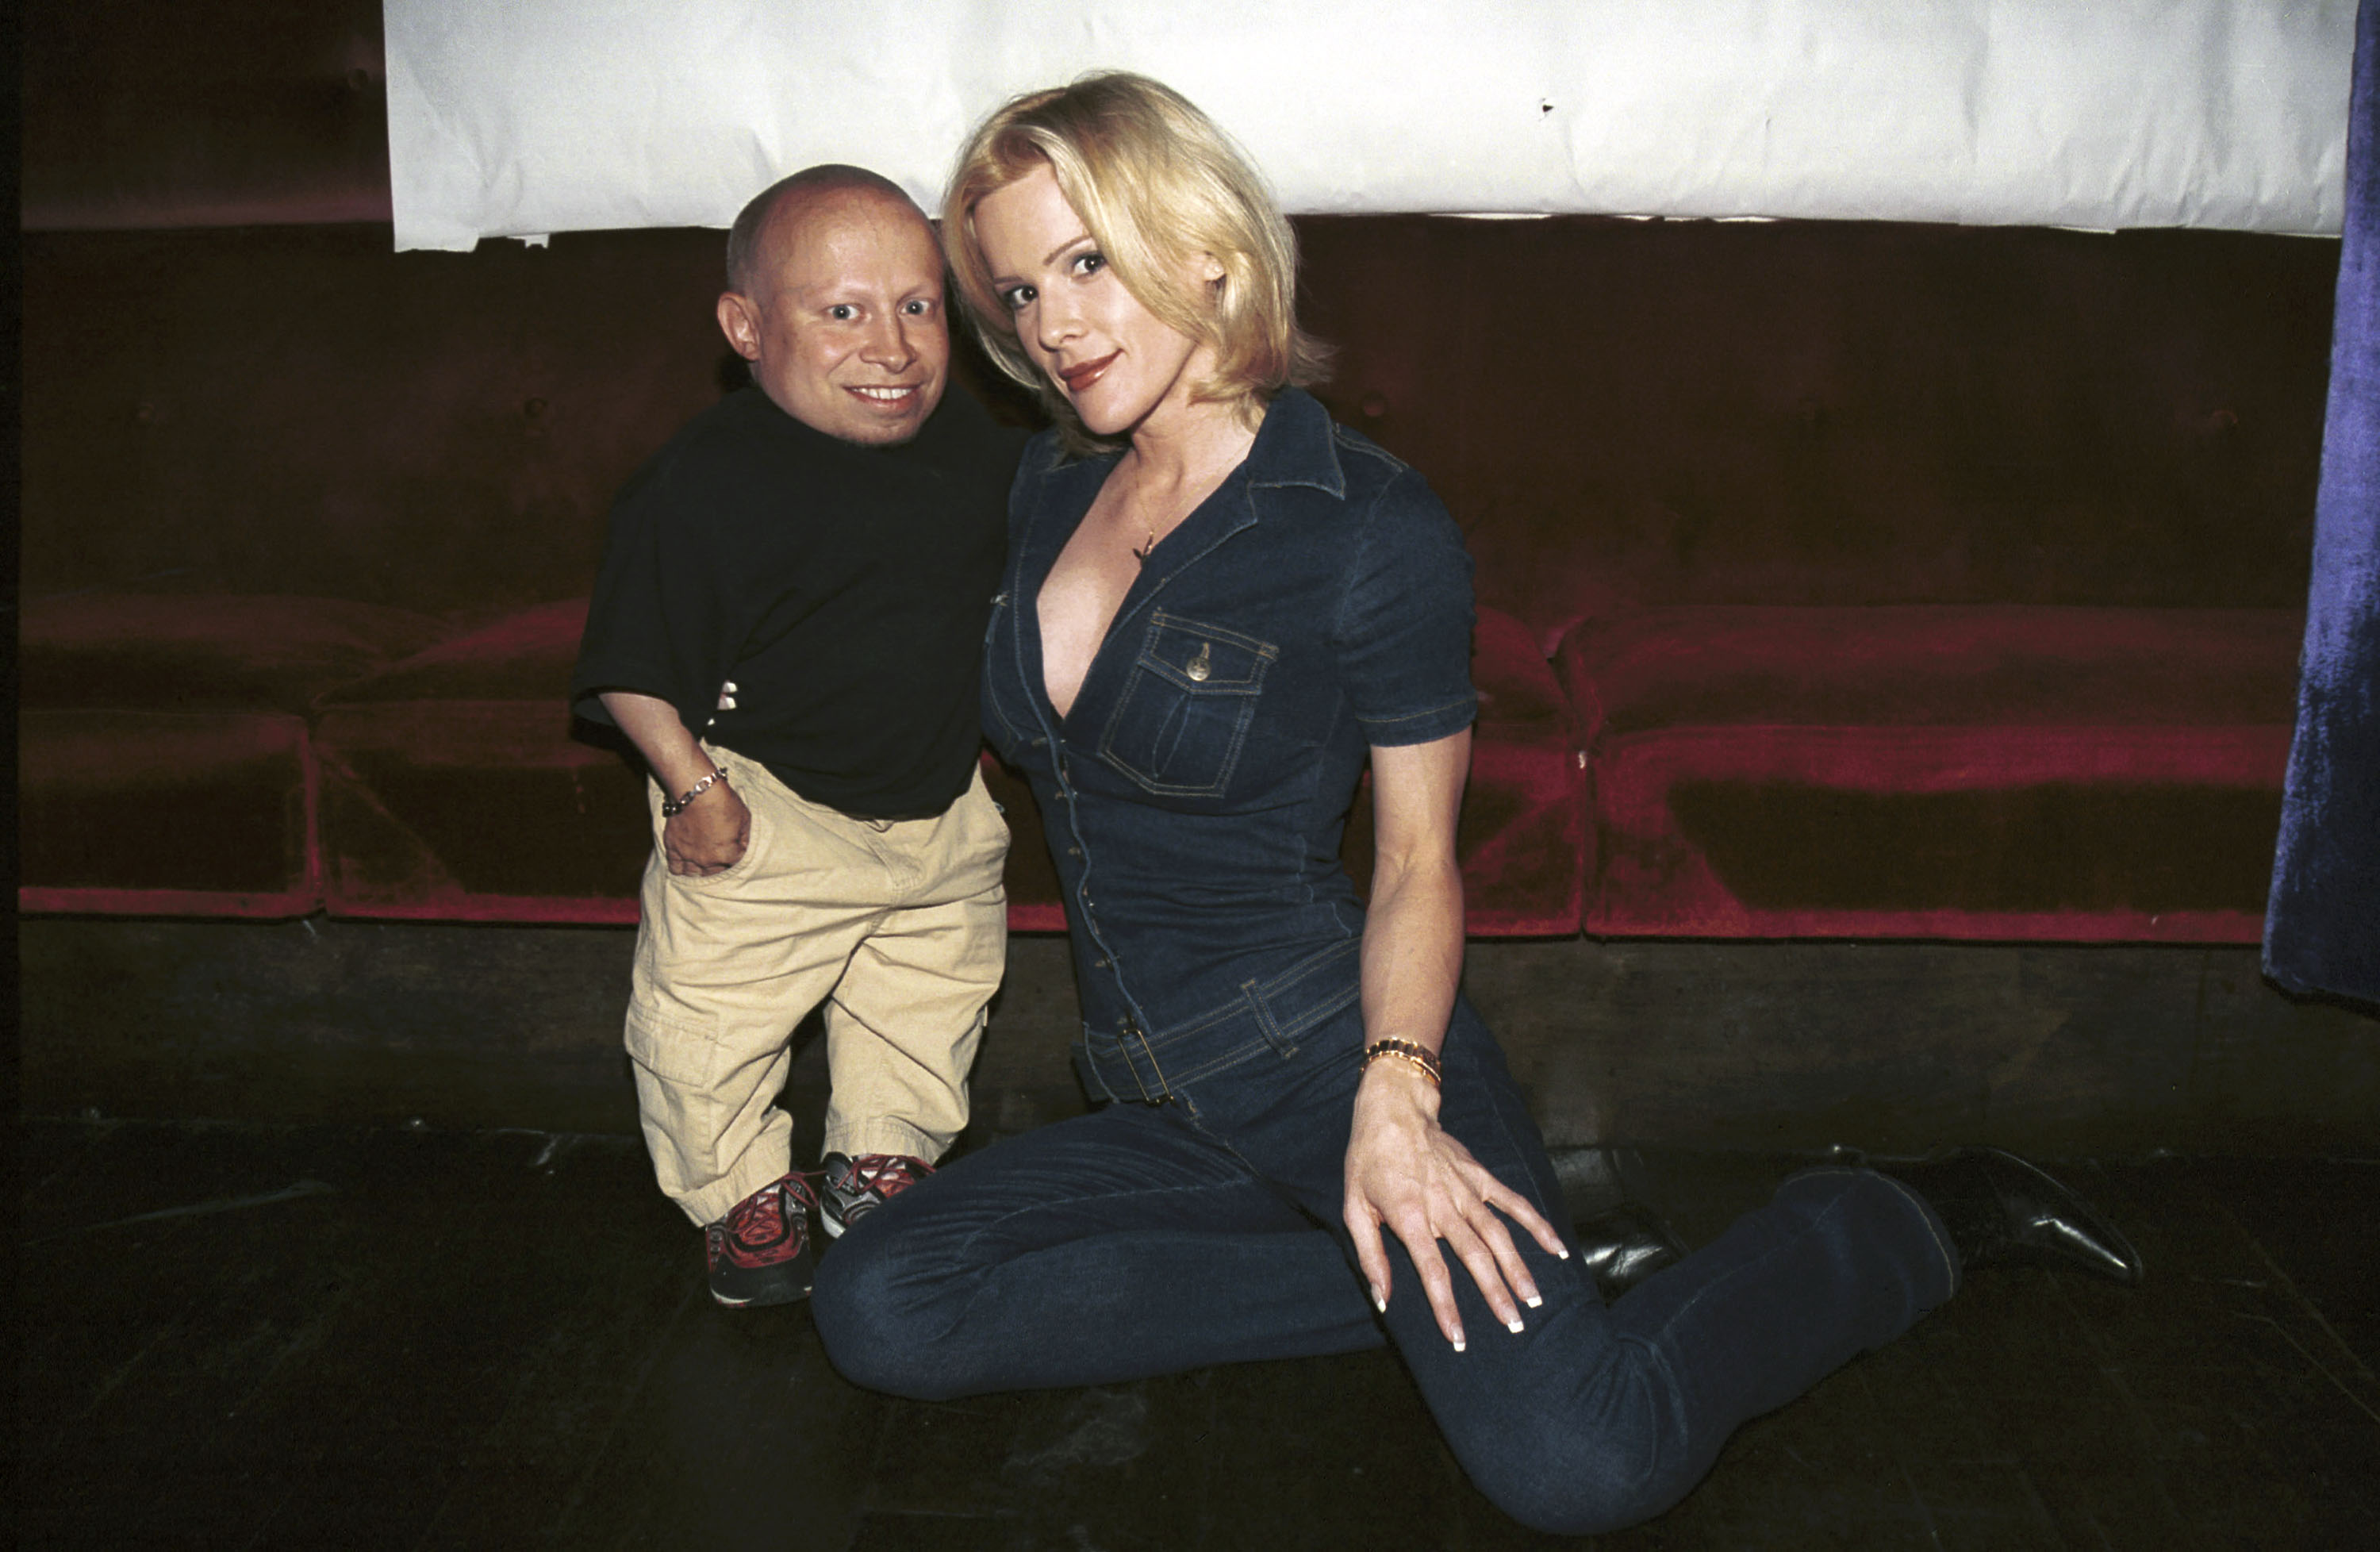 Verne Troyer and his girlfriend model Genevieve Gallen pose at Barfly nightclub on May 30, 2003 in West Hollywood, California | Source: Getty Images